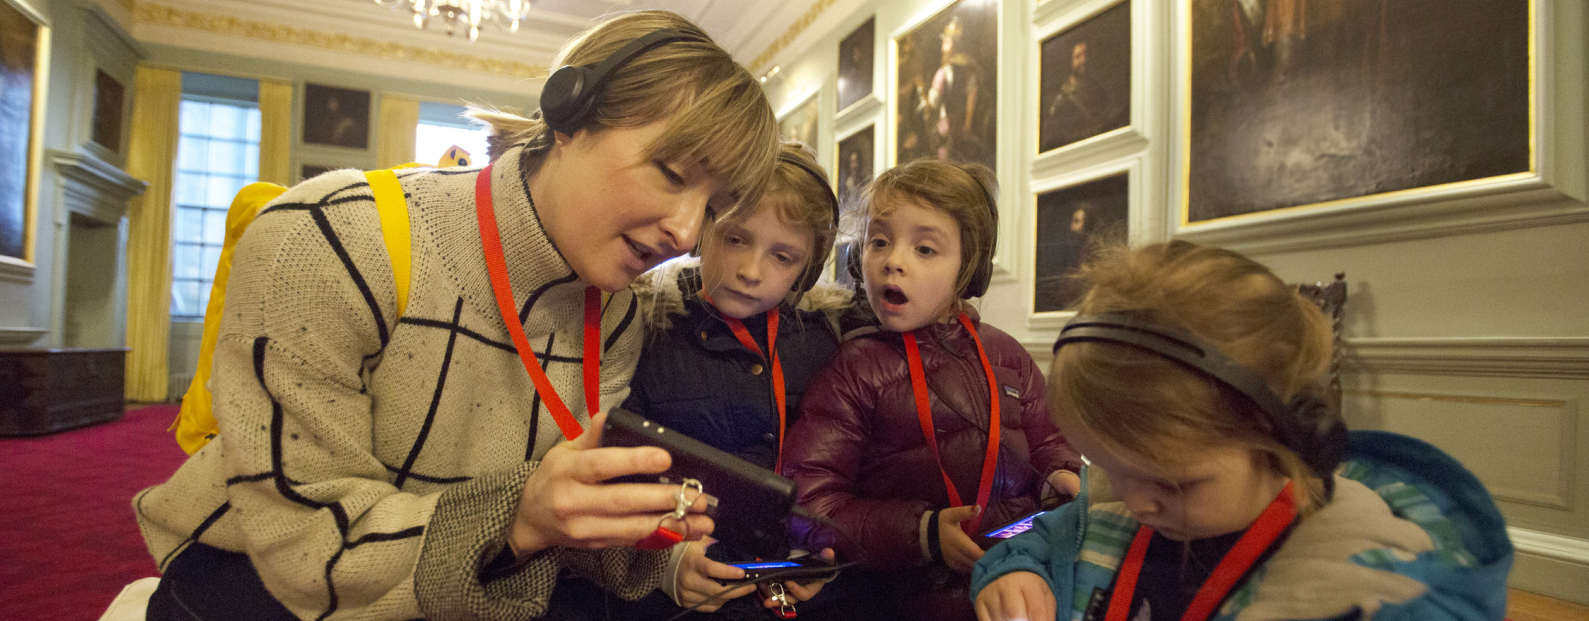 Woman and 3 children looking at multimedia guides in the Great Gallery, Palace of Holyroodhouse